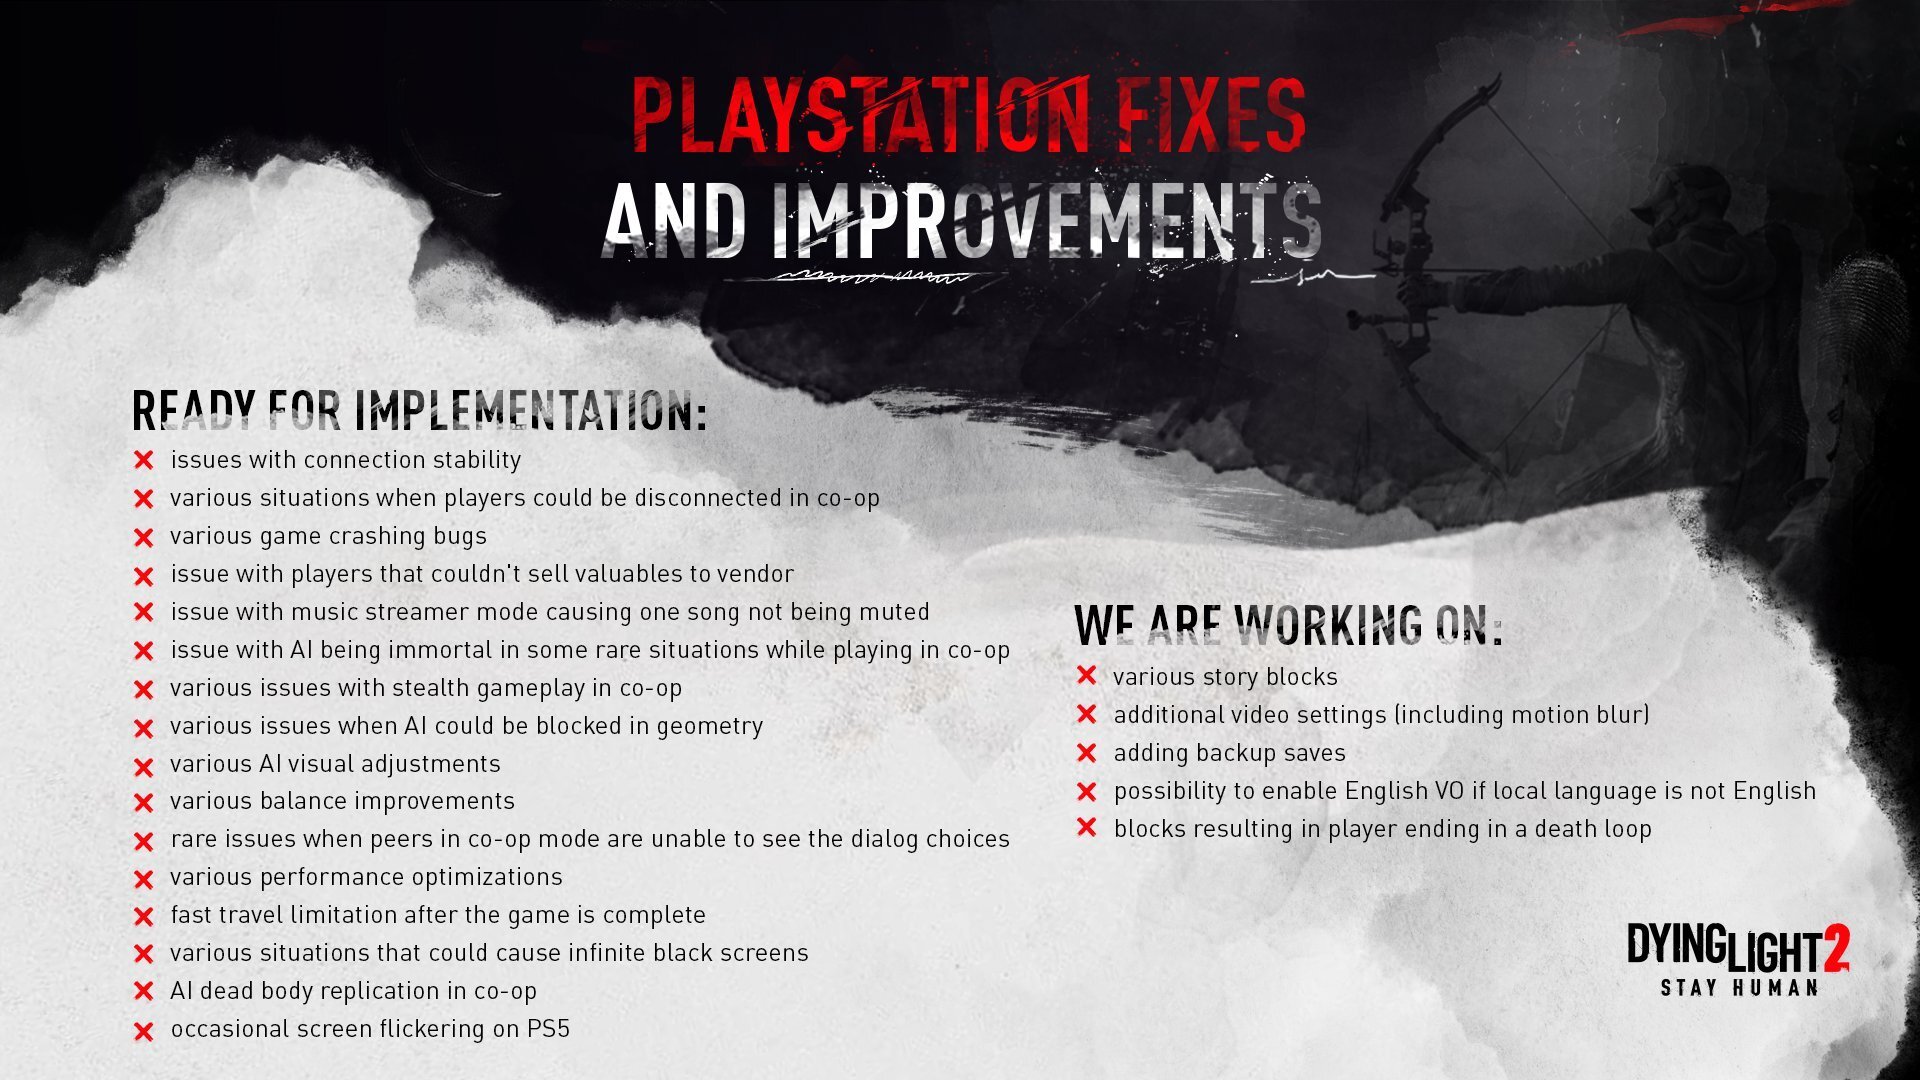 Dying Light 2 PlayStation Fixes